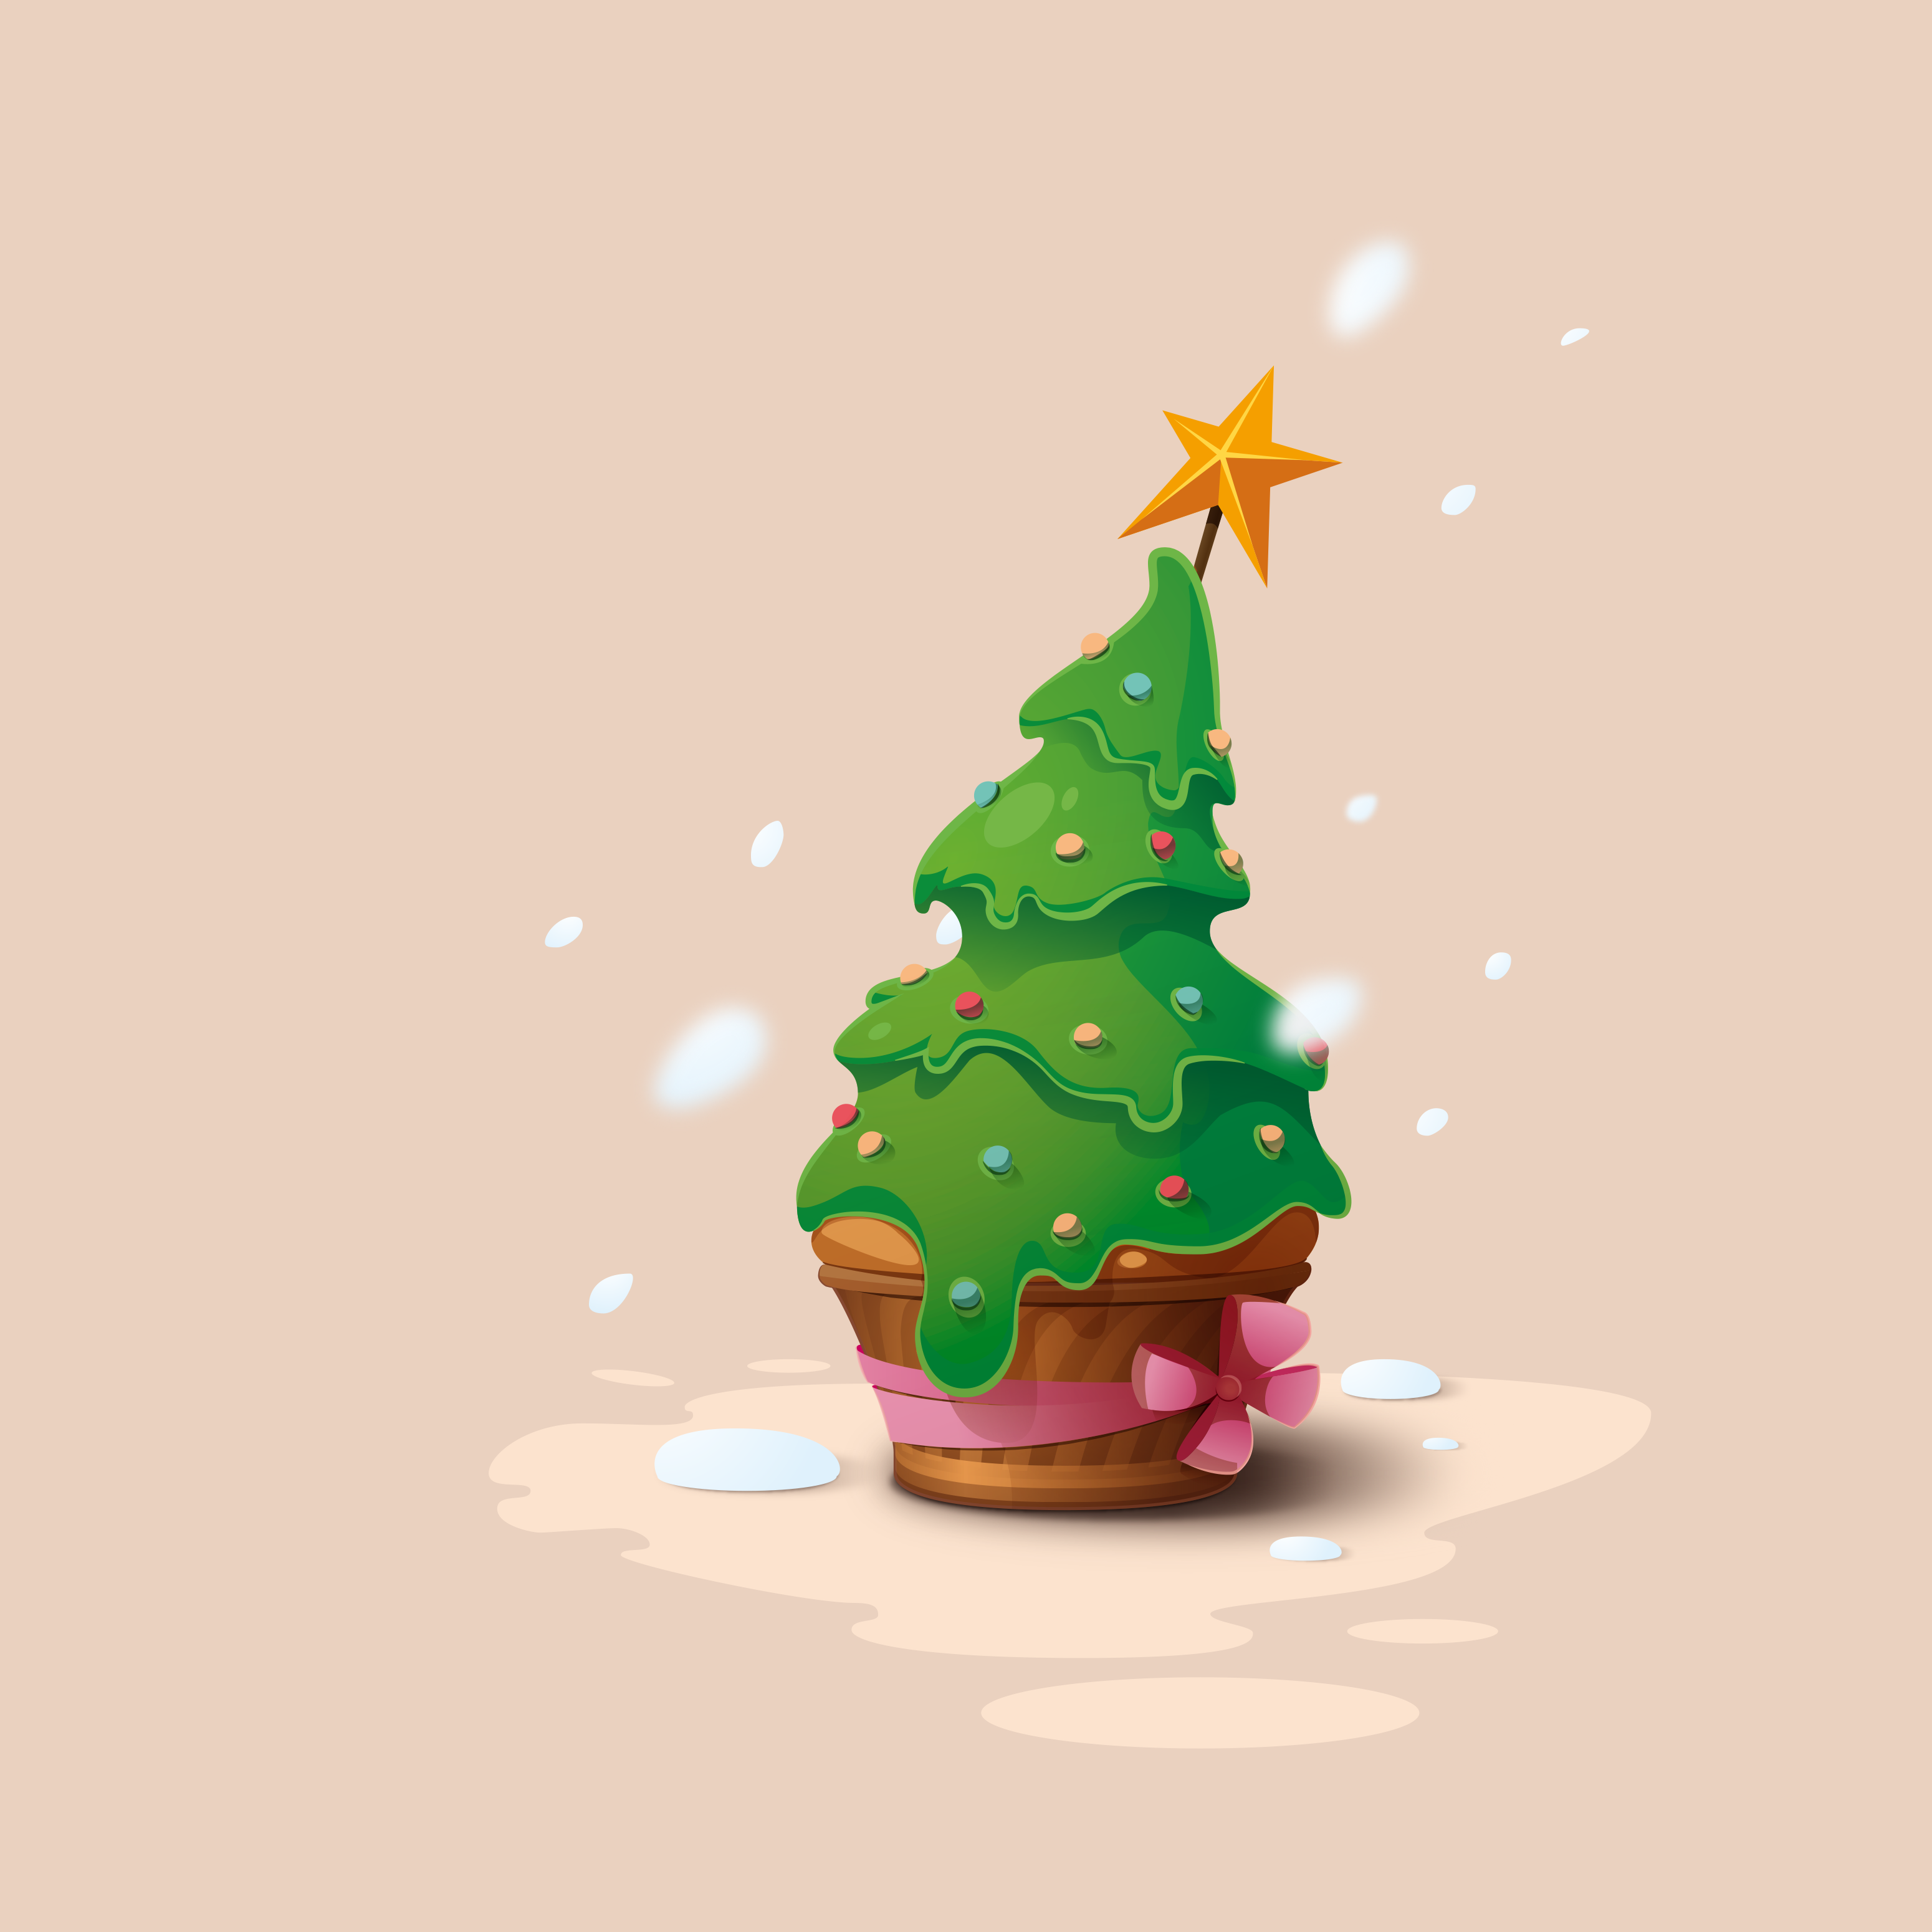 General 3100x3100 Christmas Christmas tree simple background decorations